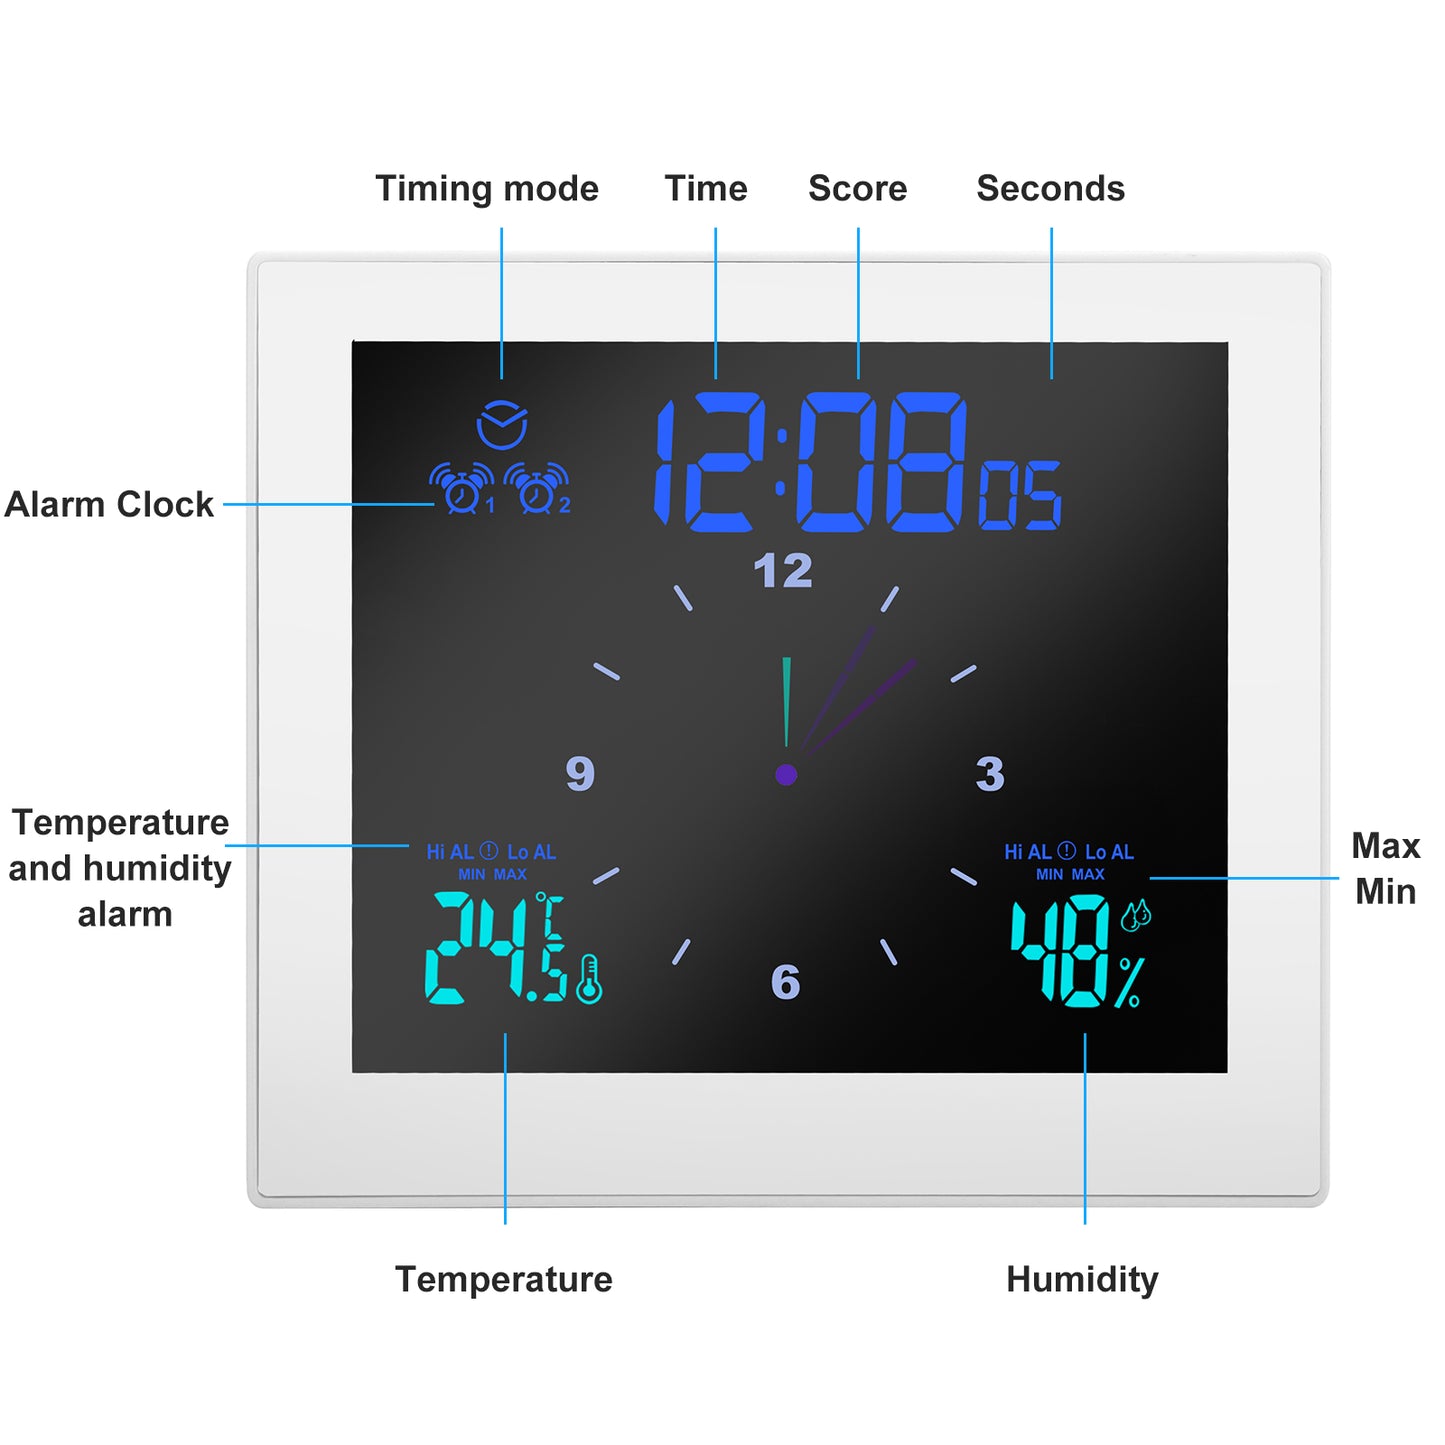 Digital Waterproof Clock - prefer bathroom with Alarm Shower Timer with Dynamic Dashboard,Large Led Screen 3 Backlights Waterproof IP65 Wall Clock with Temperature Humidity Display and Exceed max/min with Suction Cup ( No drilling required ), Black